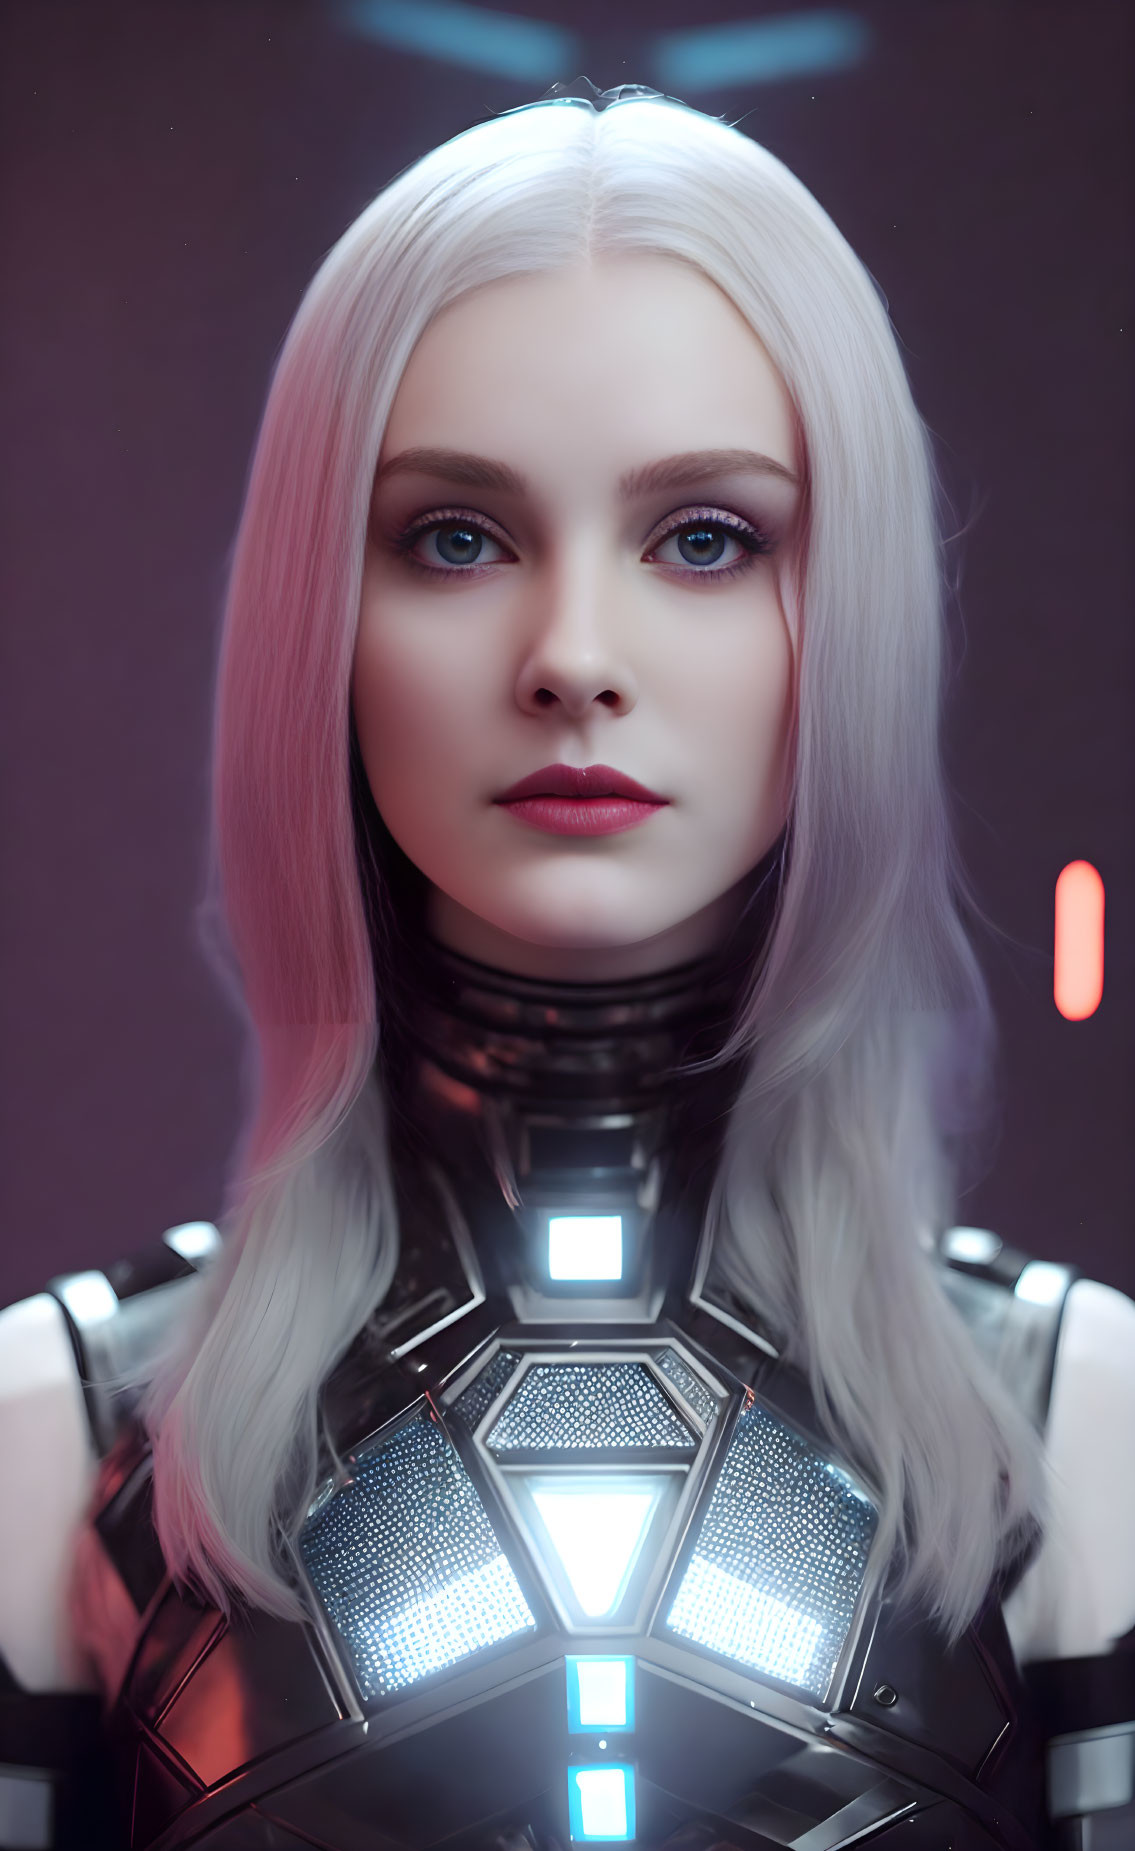 White-Haired Woman in Futuristic Armor with Blue Eyes and Glowing Lights on Dark Background